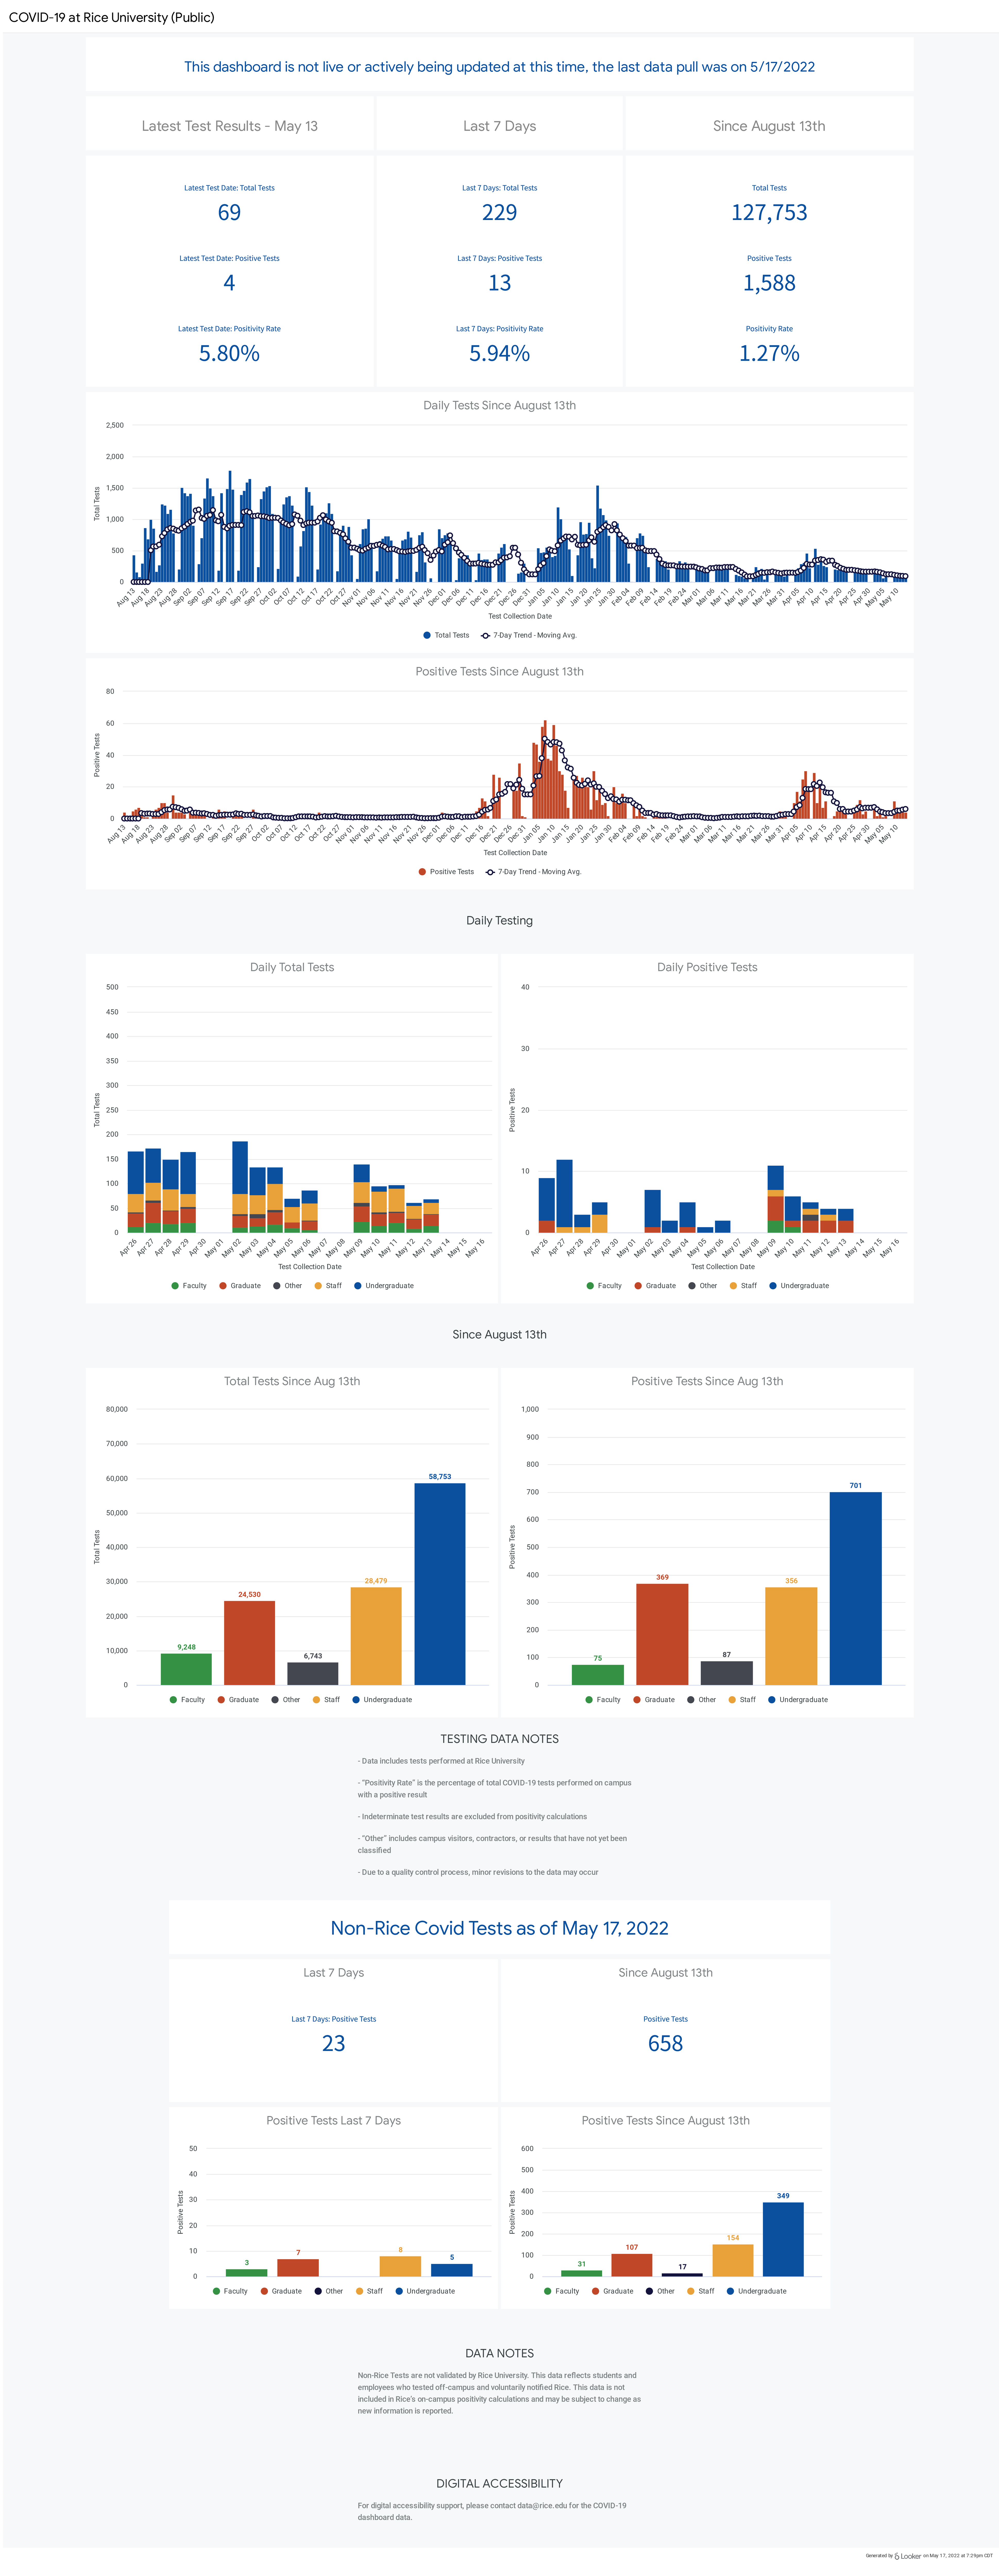 COVID-19 at Rice University dashboard, includes Rice and Non-Rice statistics and charts. For more detailed information, contact data@rice.edu